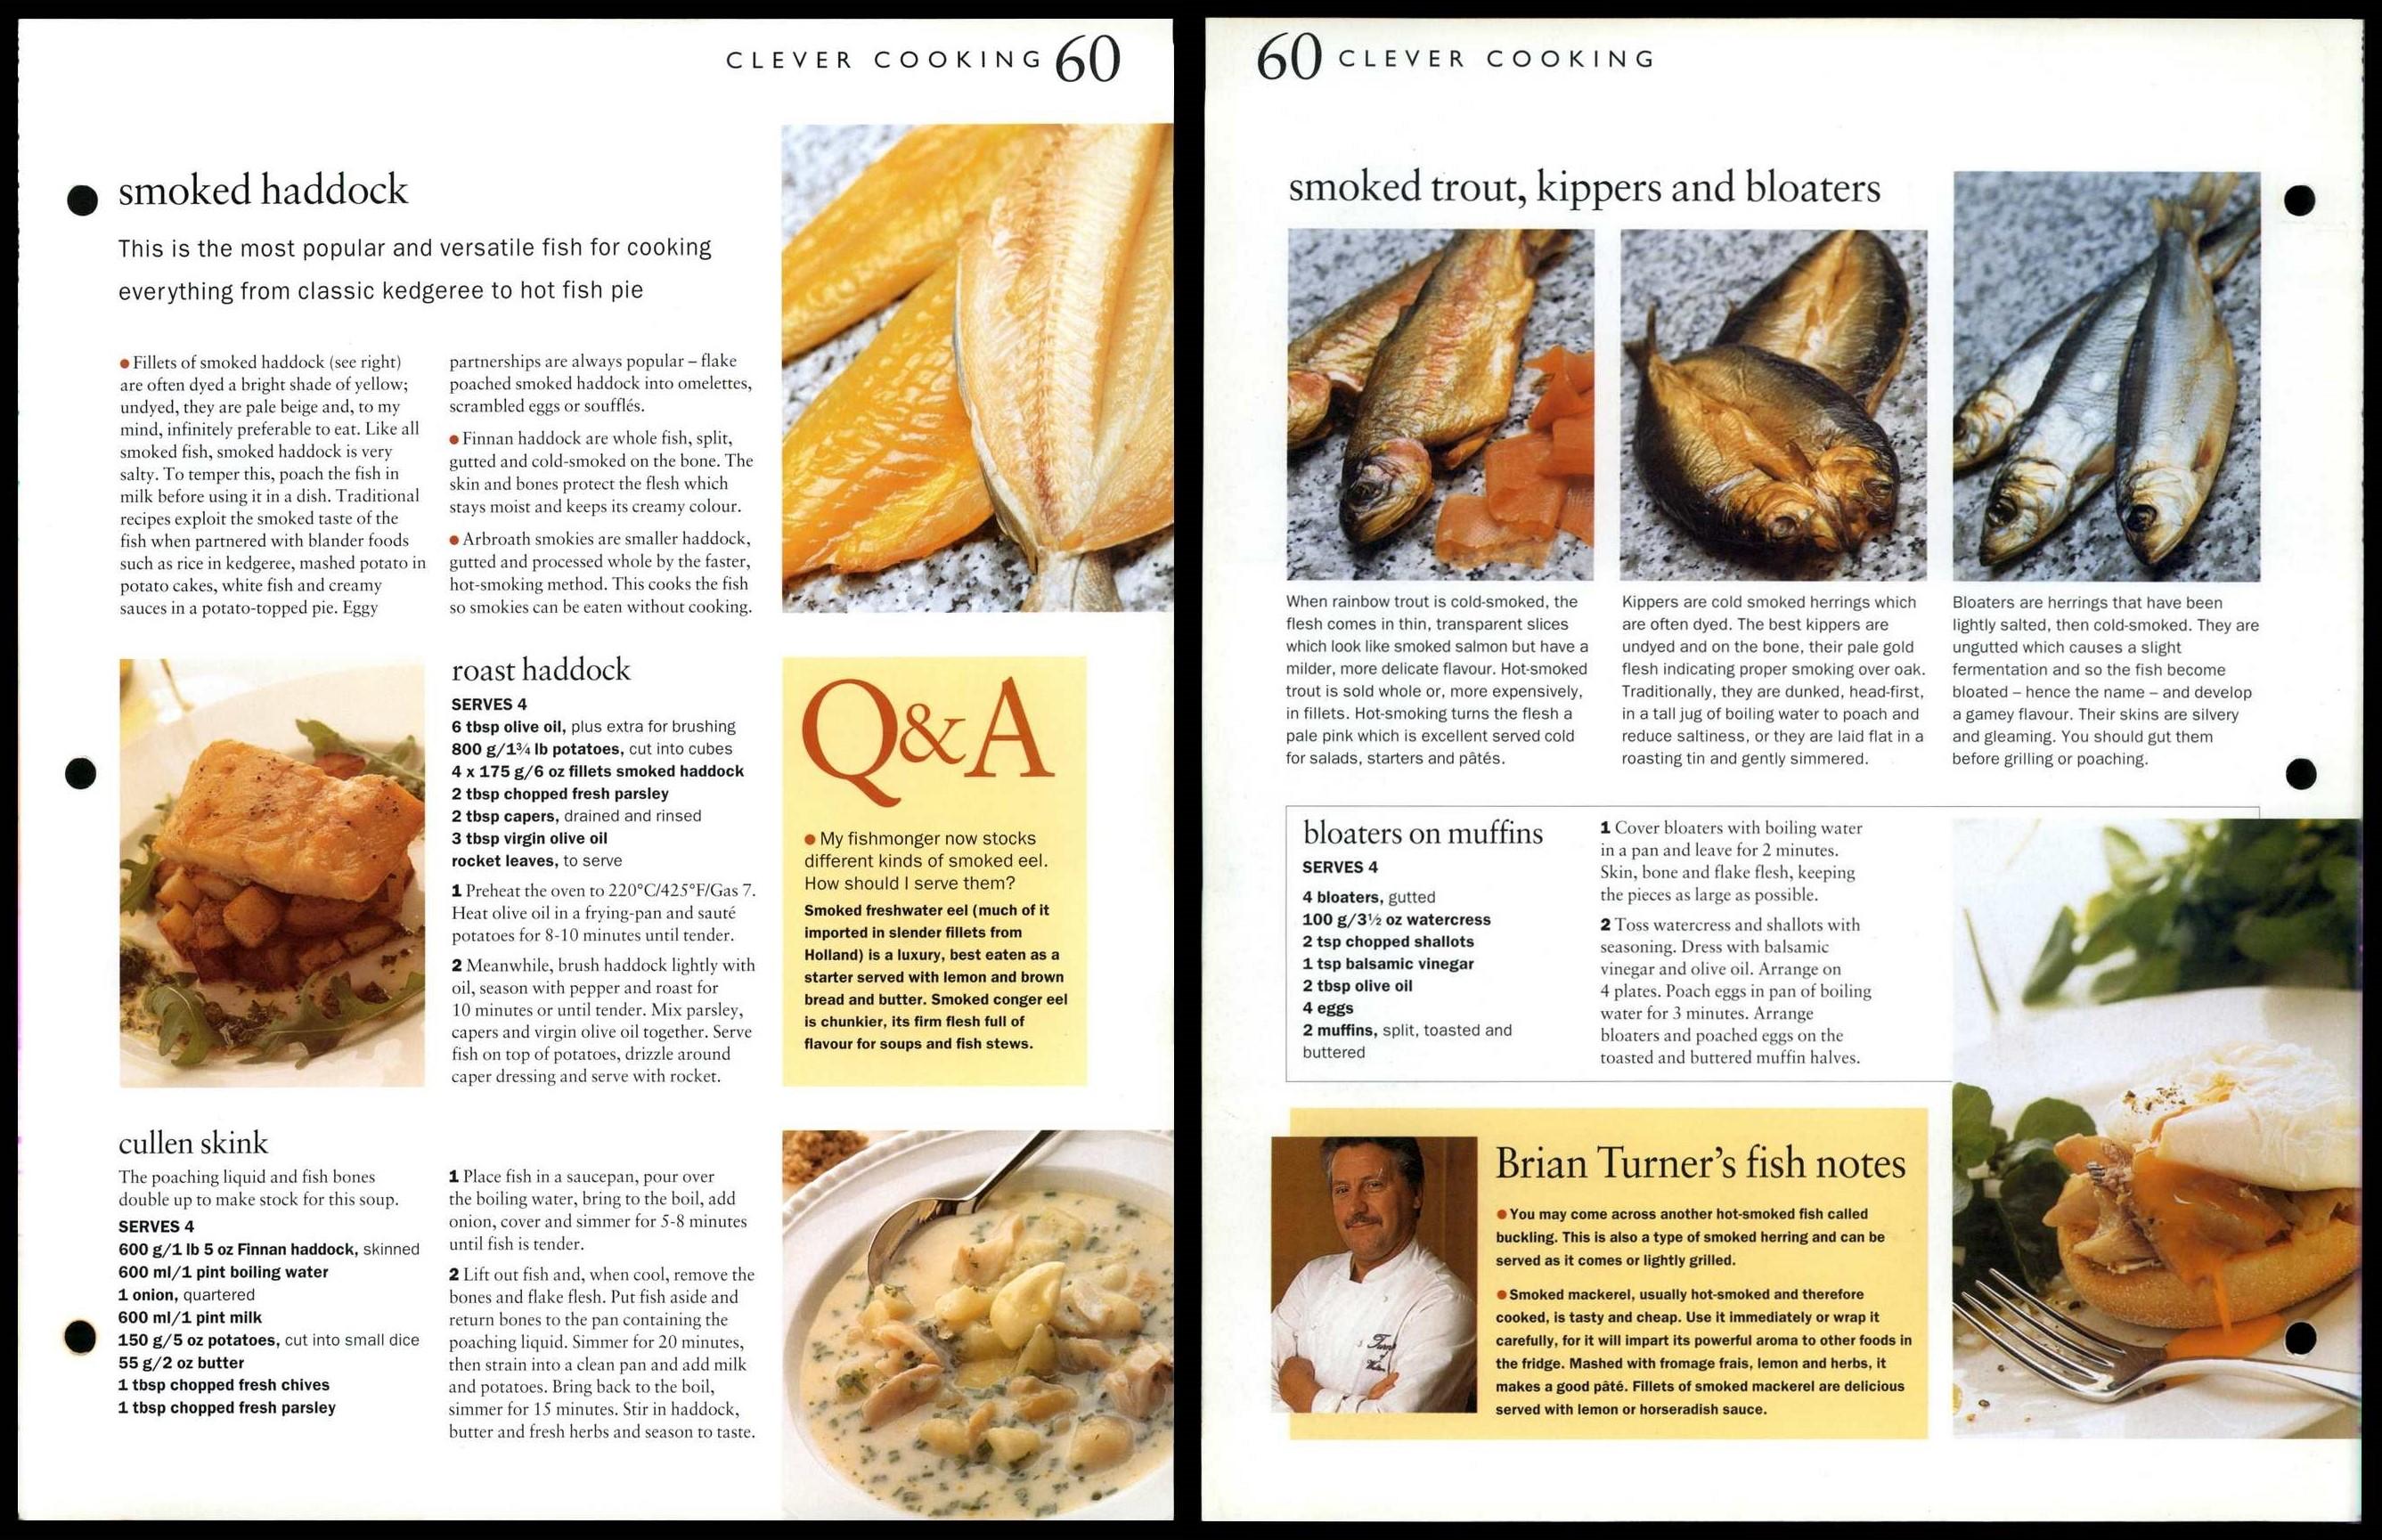 Smoked Fish #59 & 60 Clever Cooking Ready Steady Cook Recipes On 2 Pages